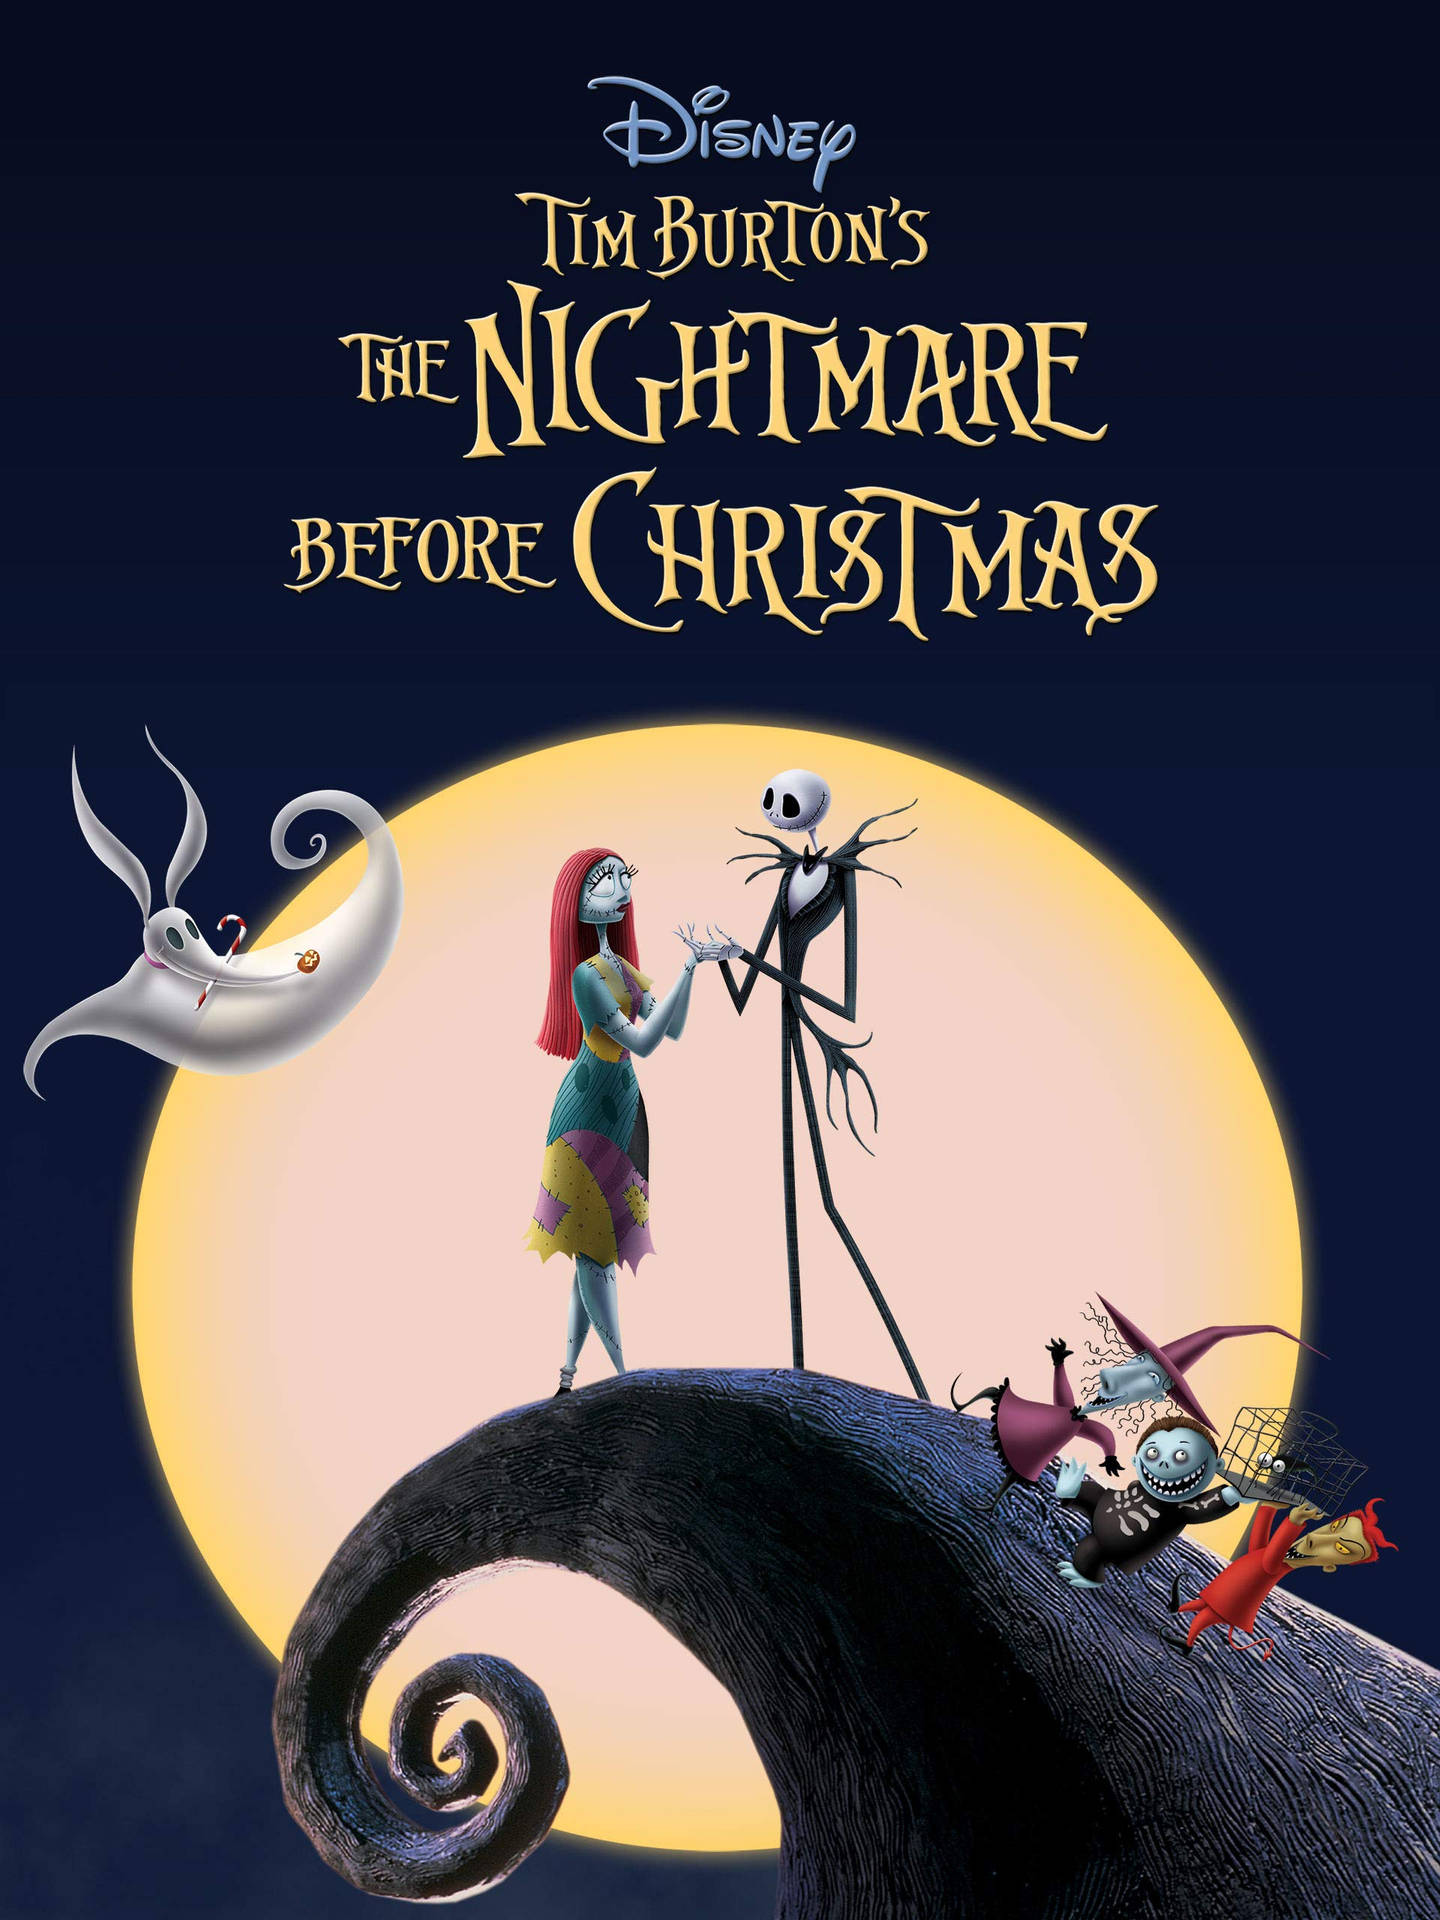 The Nightmare Before Christmas Movie Poster Background